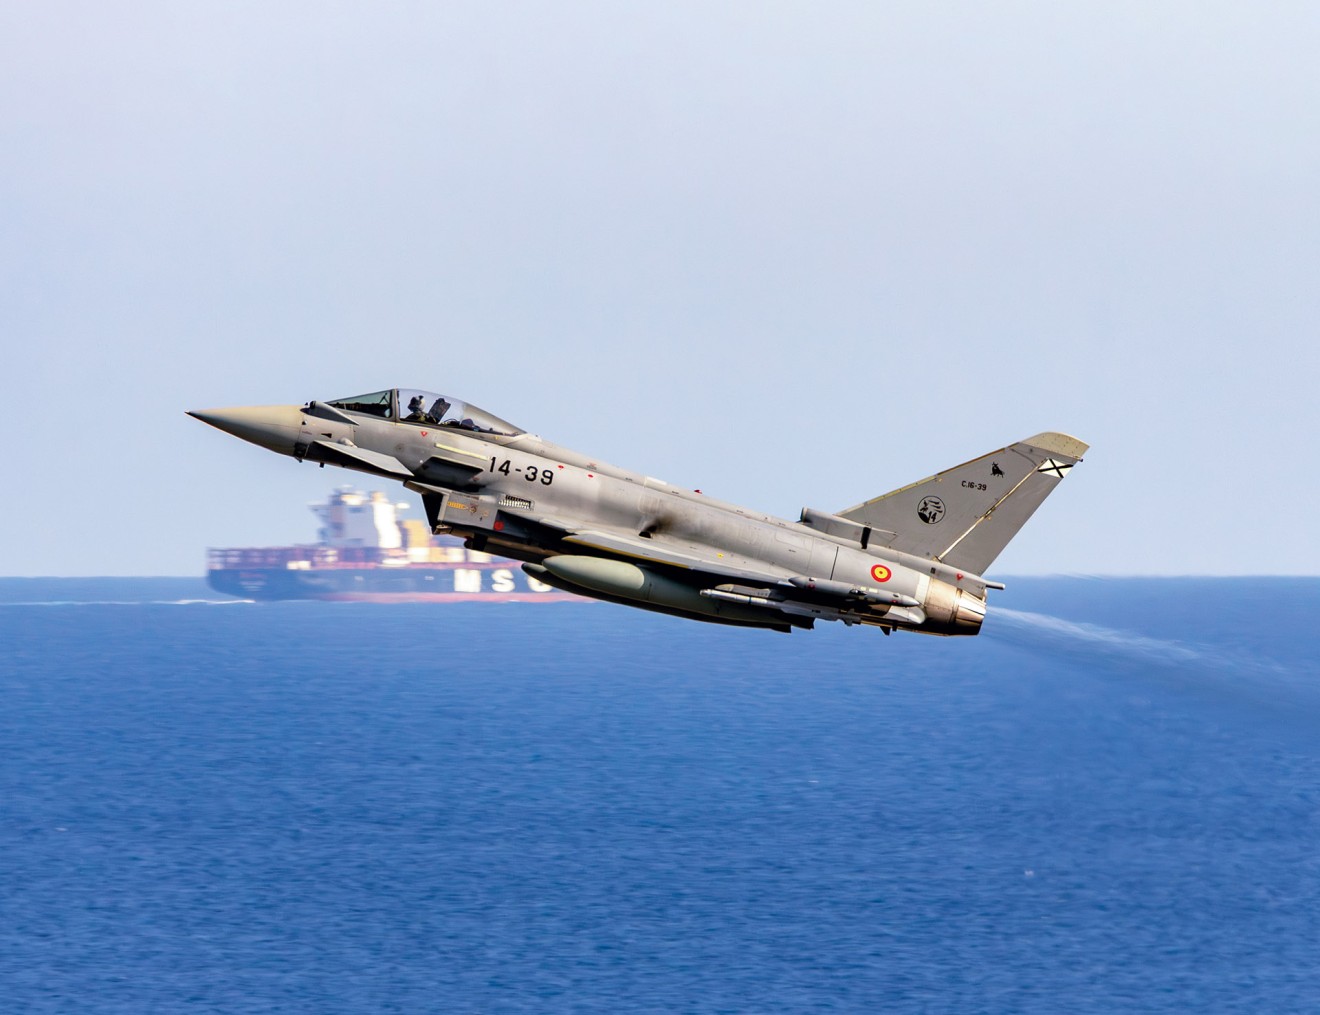 A Spanish Eurofighter Typhoon from Ala 14 based at Albacete Air Base on a training mission over the Spanish coastline